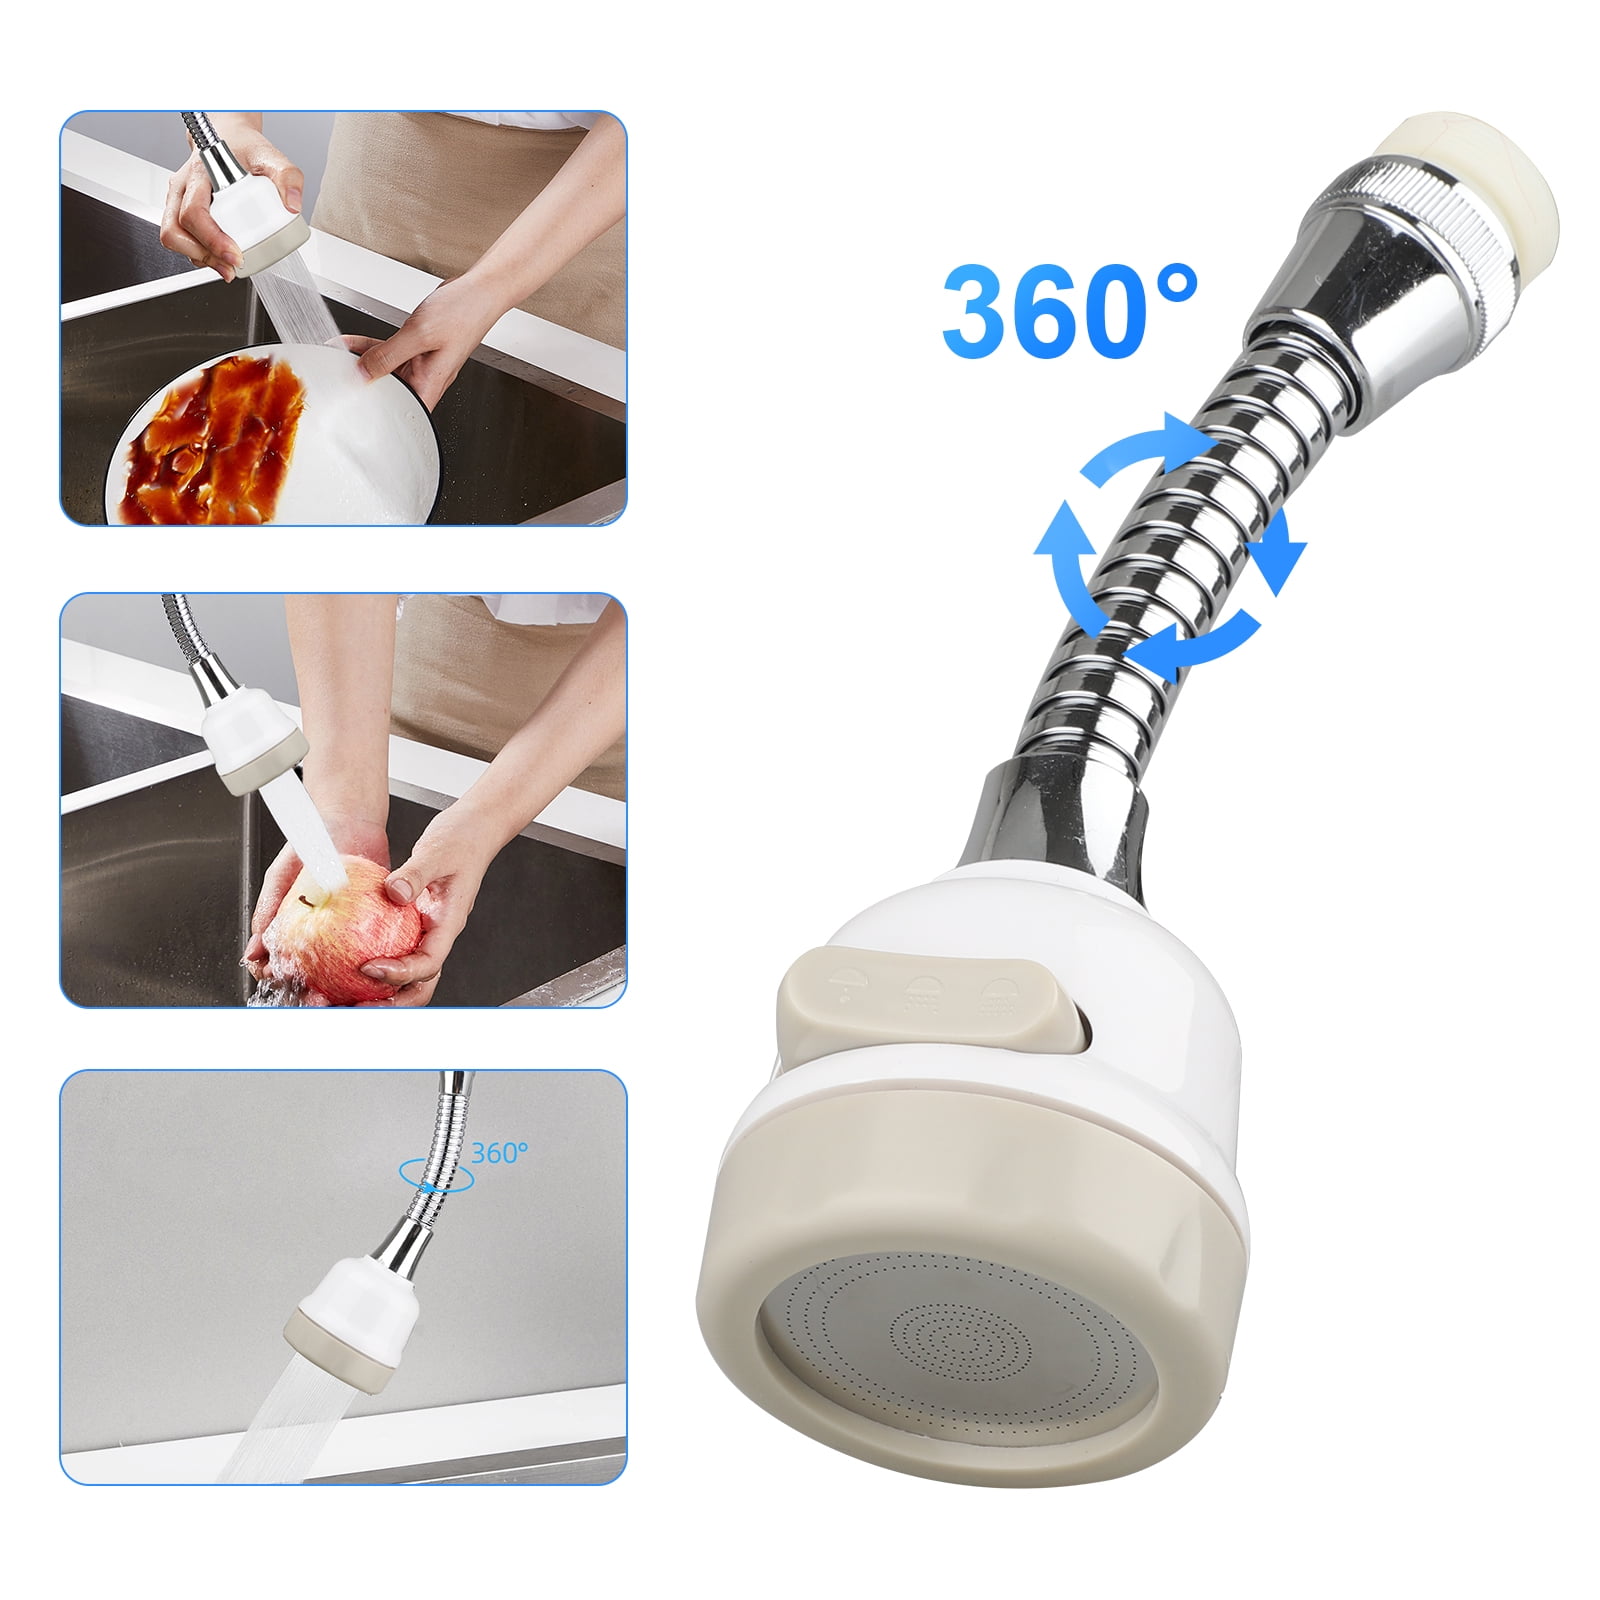 360 Degree Swivel Magic Faucet Movable Kitchen Tap Head Universal Water Sprayer 